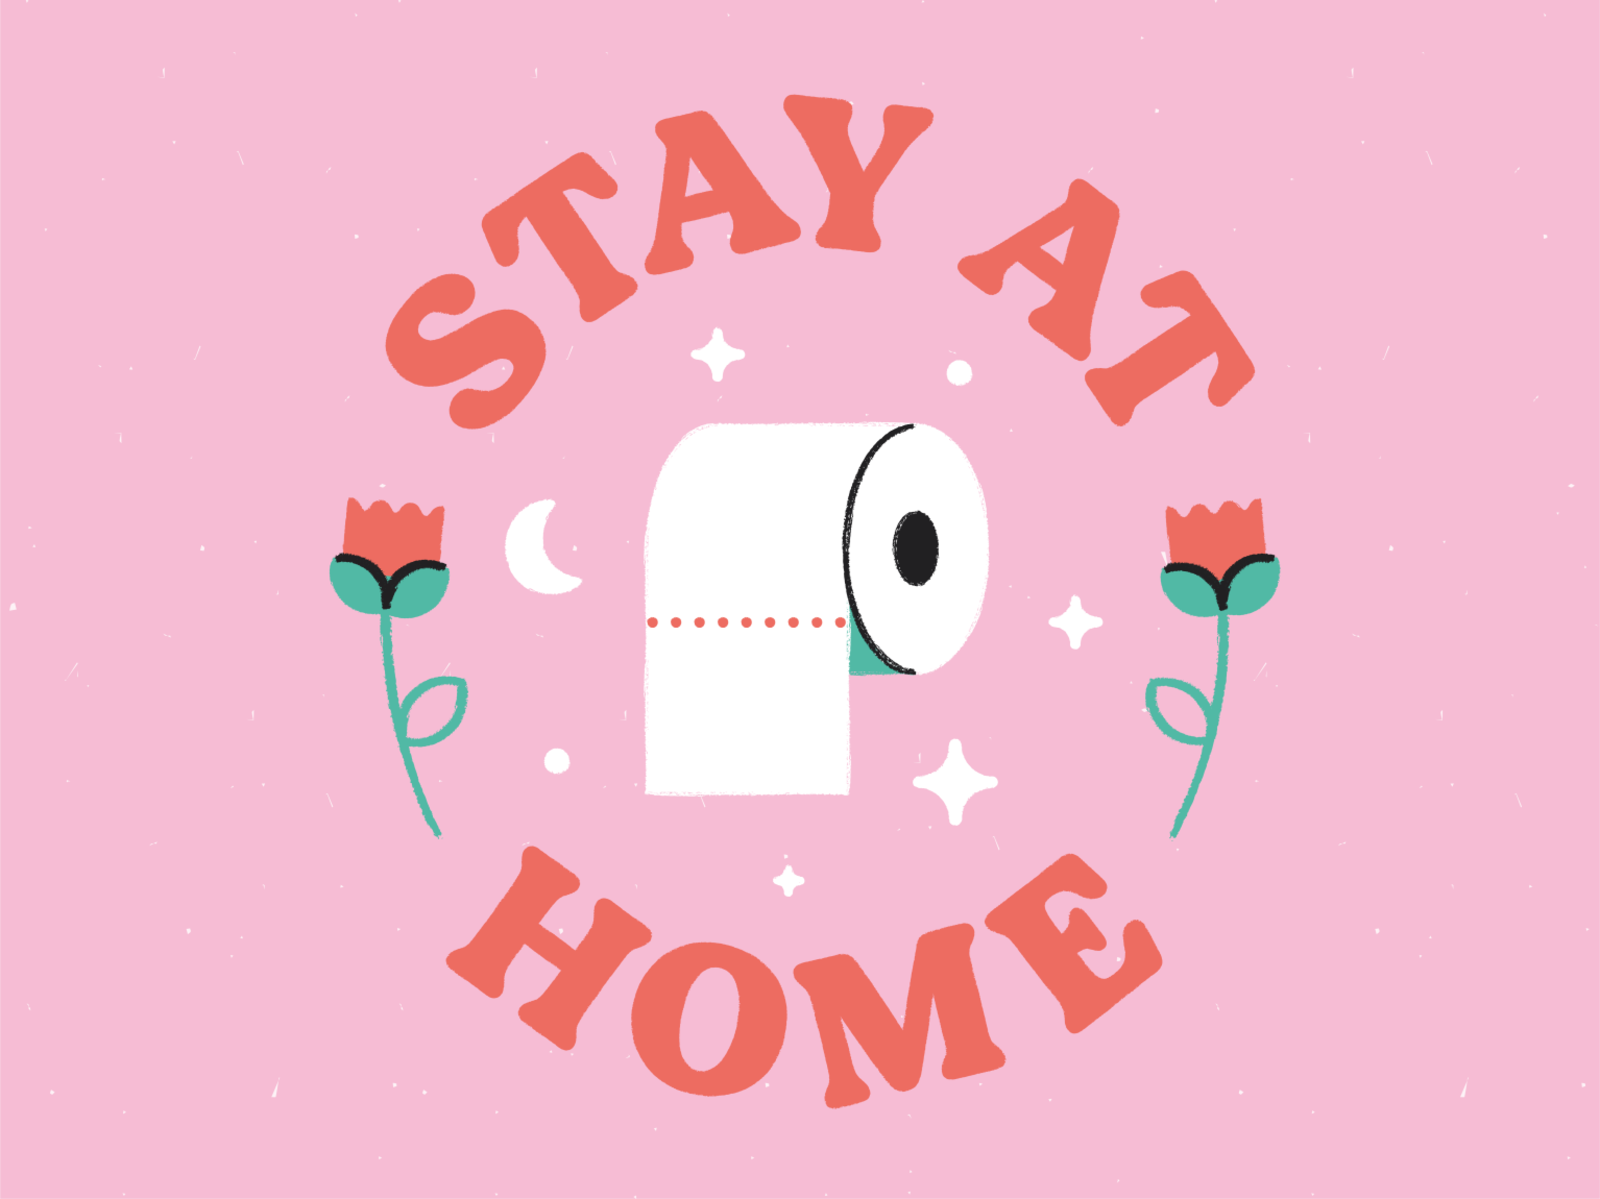 Stay At Home coronavirus covid 19 covid-19 covid19 illustration illustrator stay at home texture toilet paper toilet roll vector virus